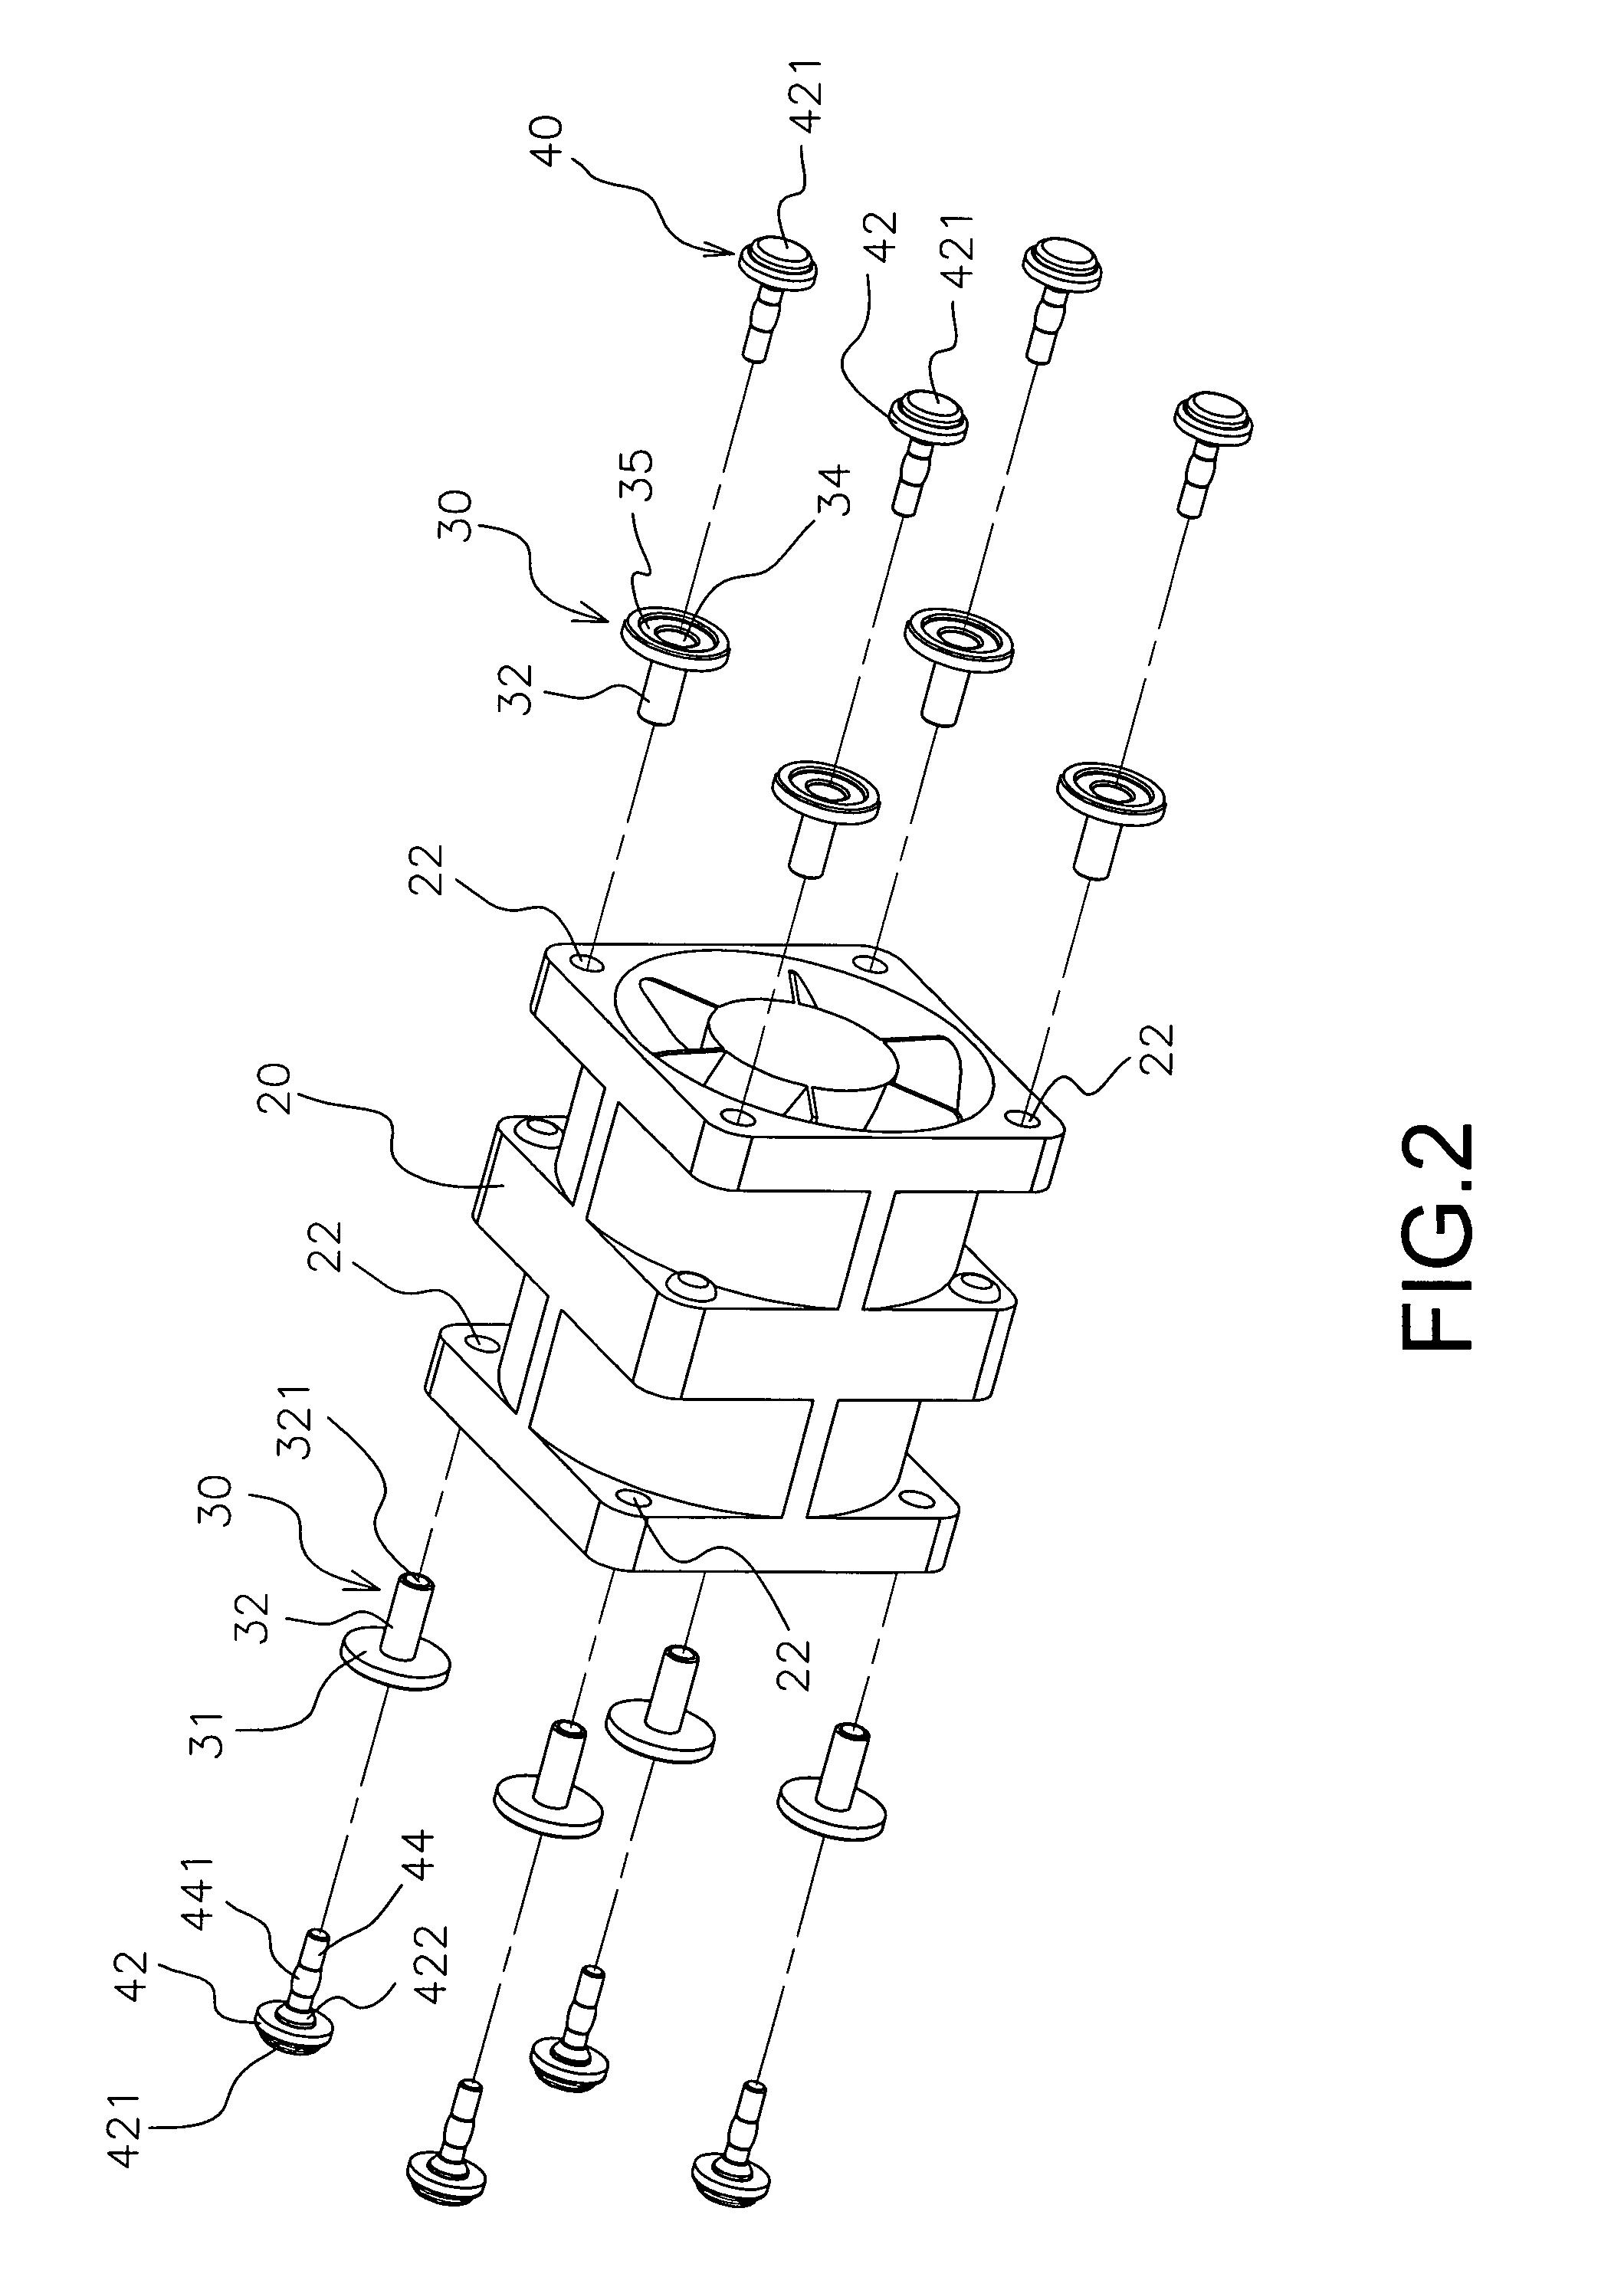 Vibration absorption device for a fan